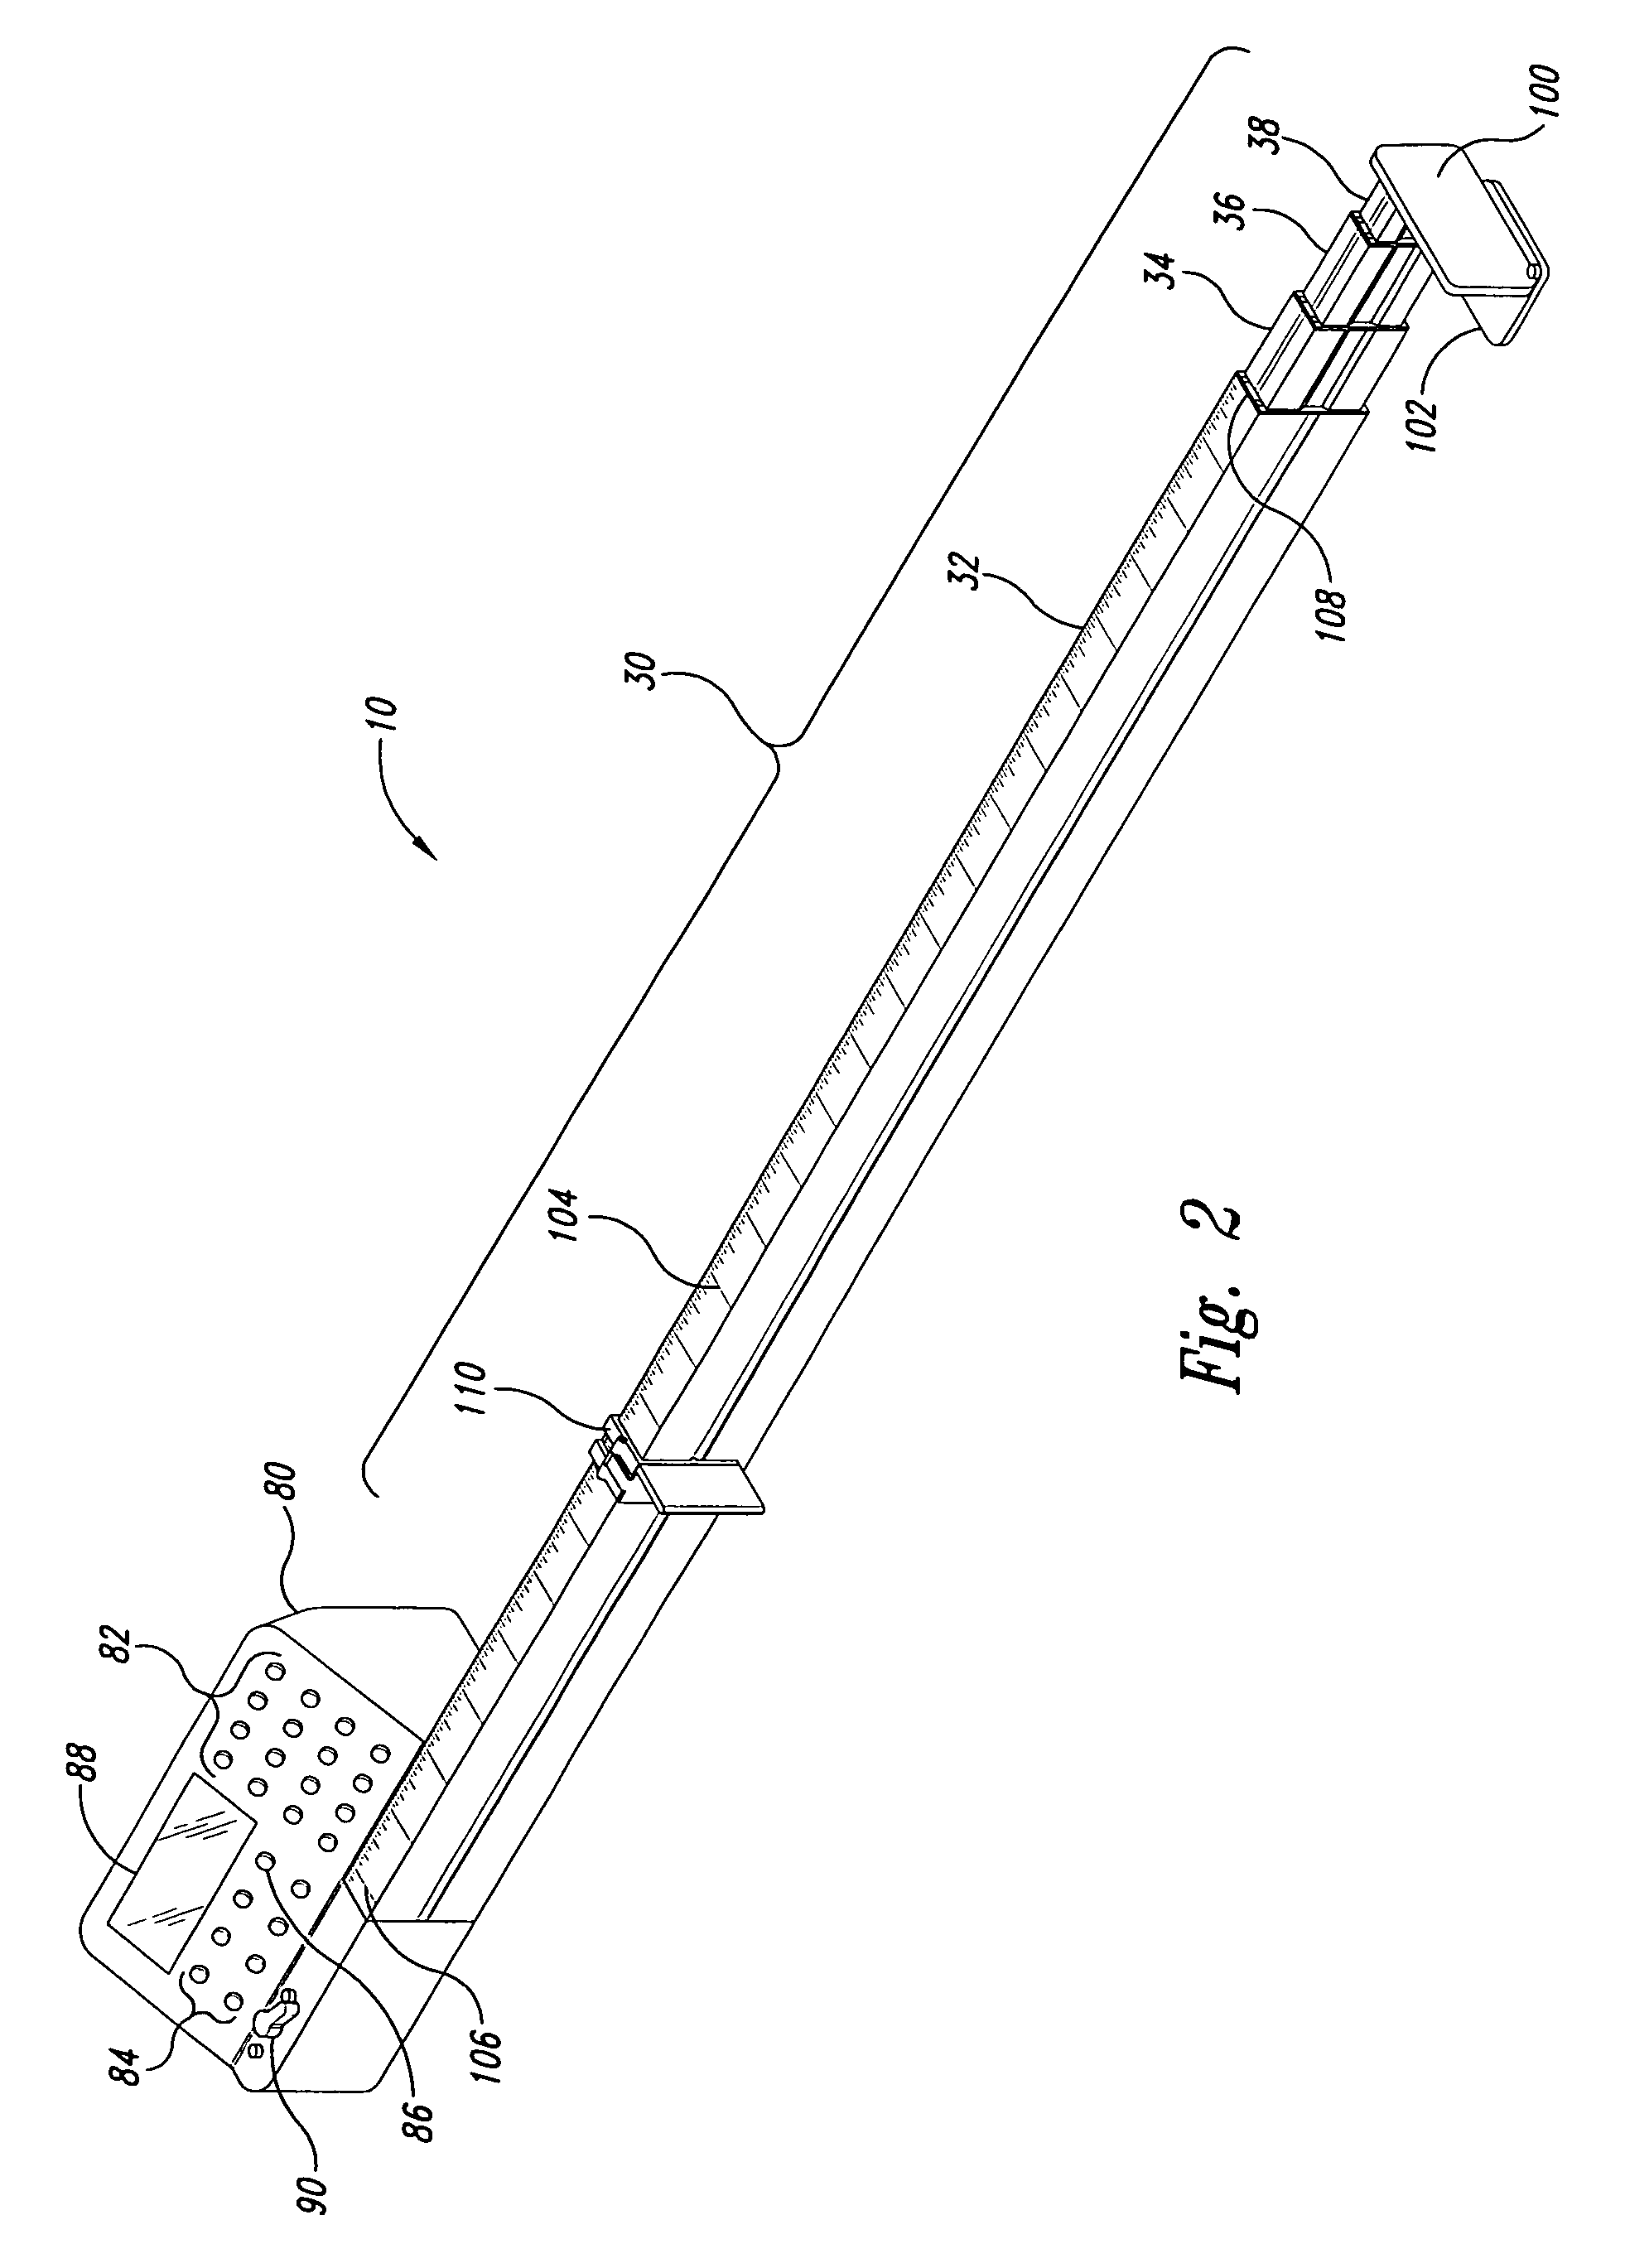 Repetitive fence for cross-cutting materials